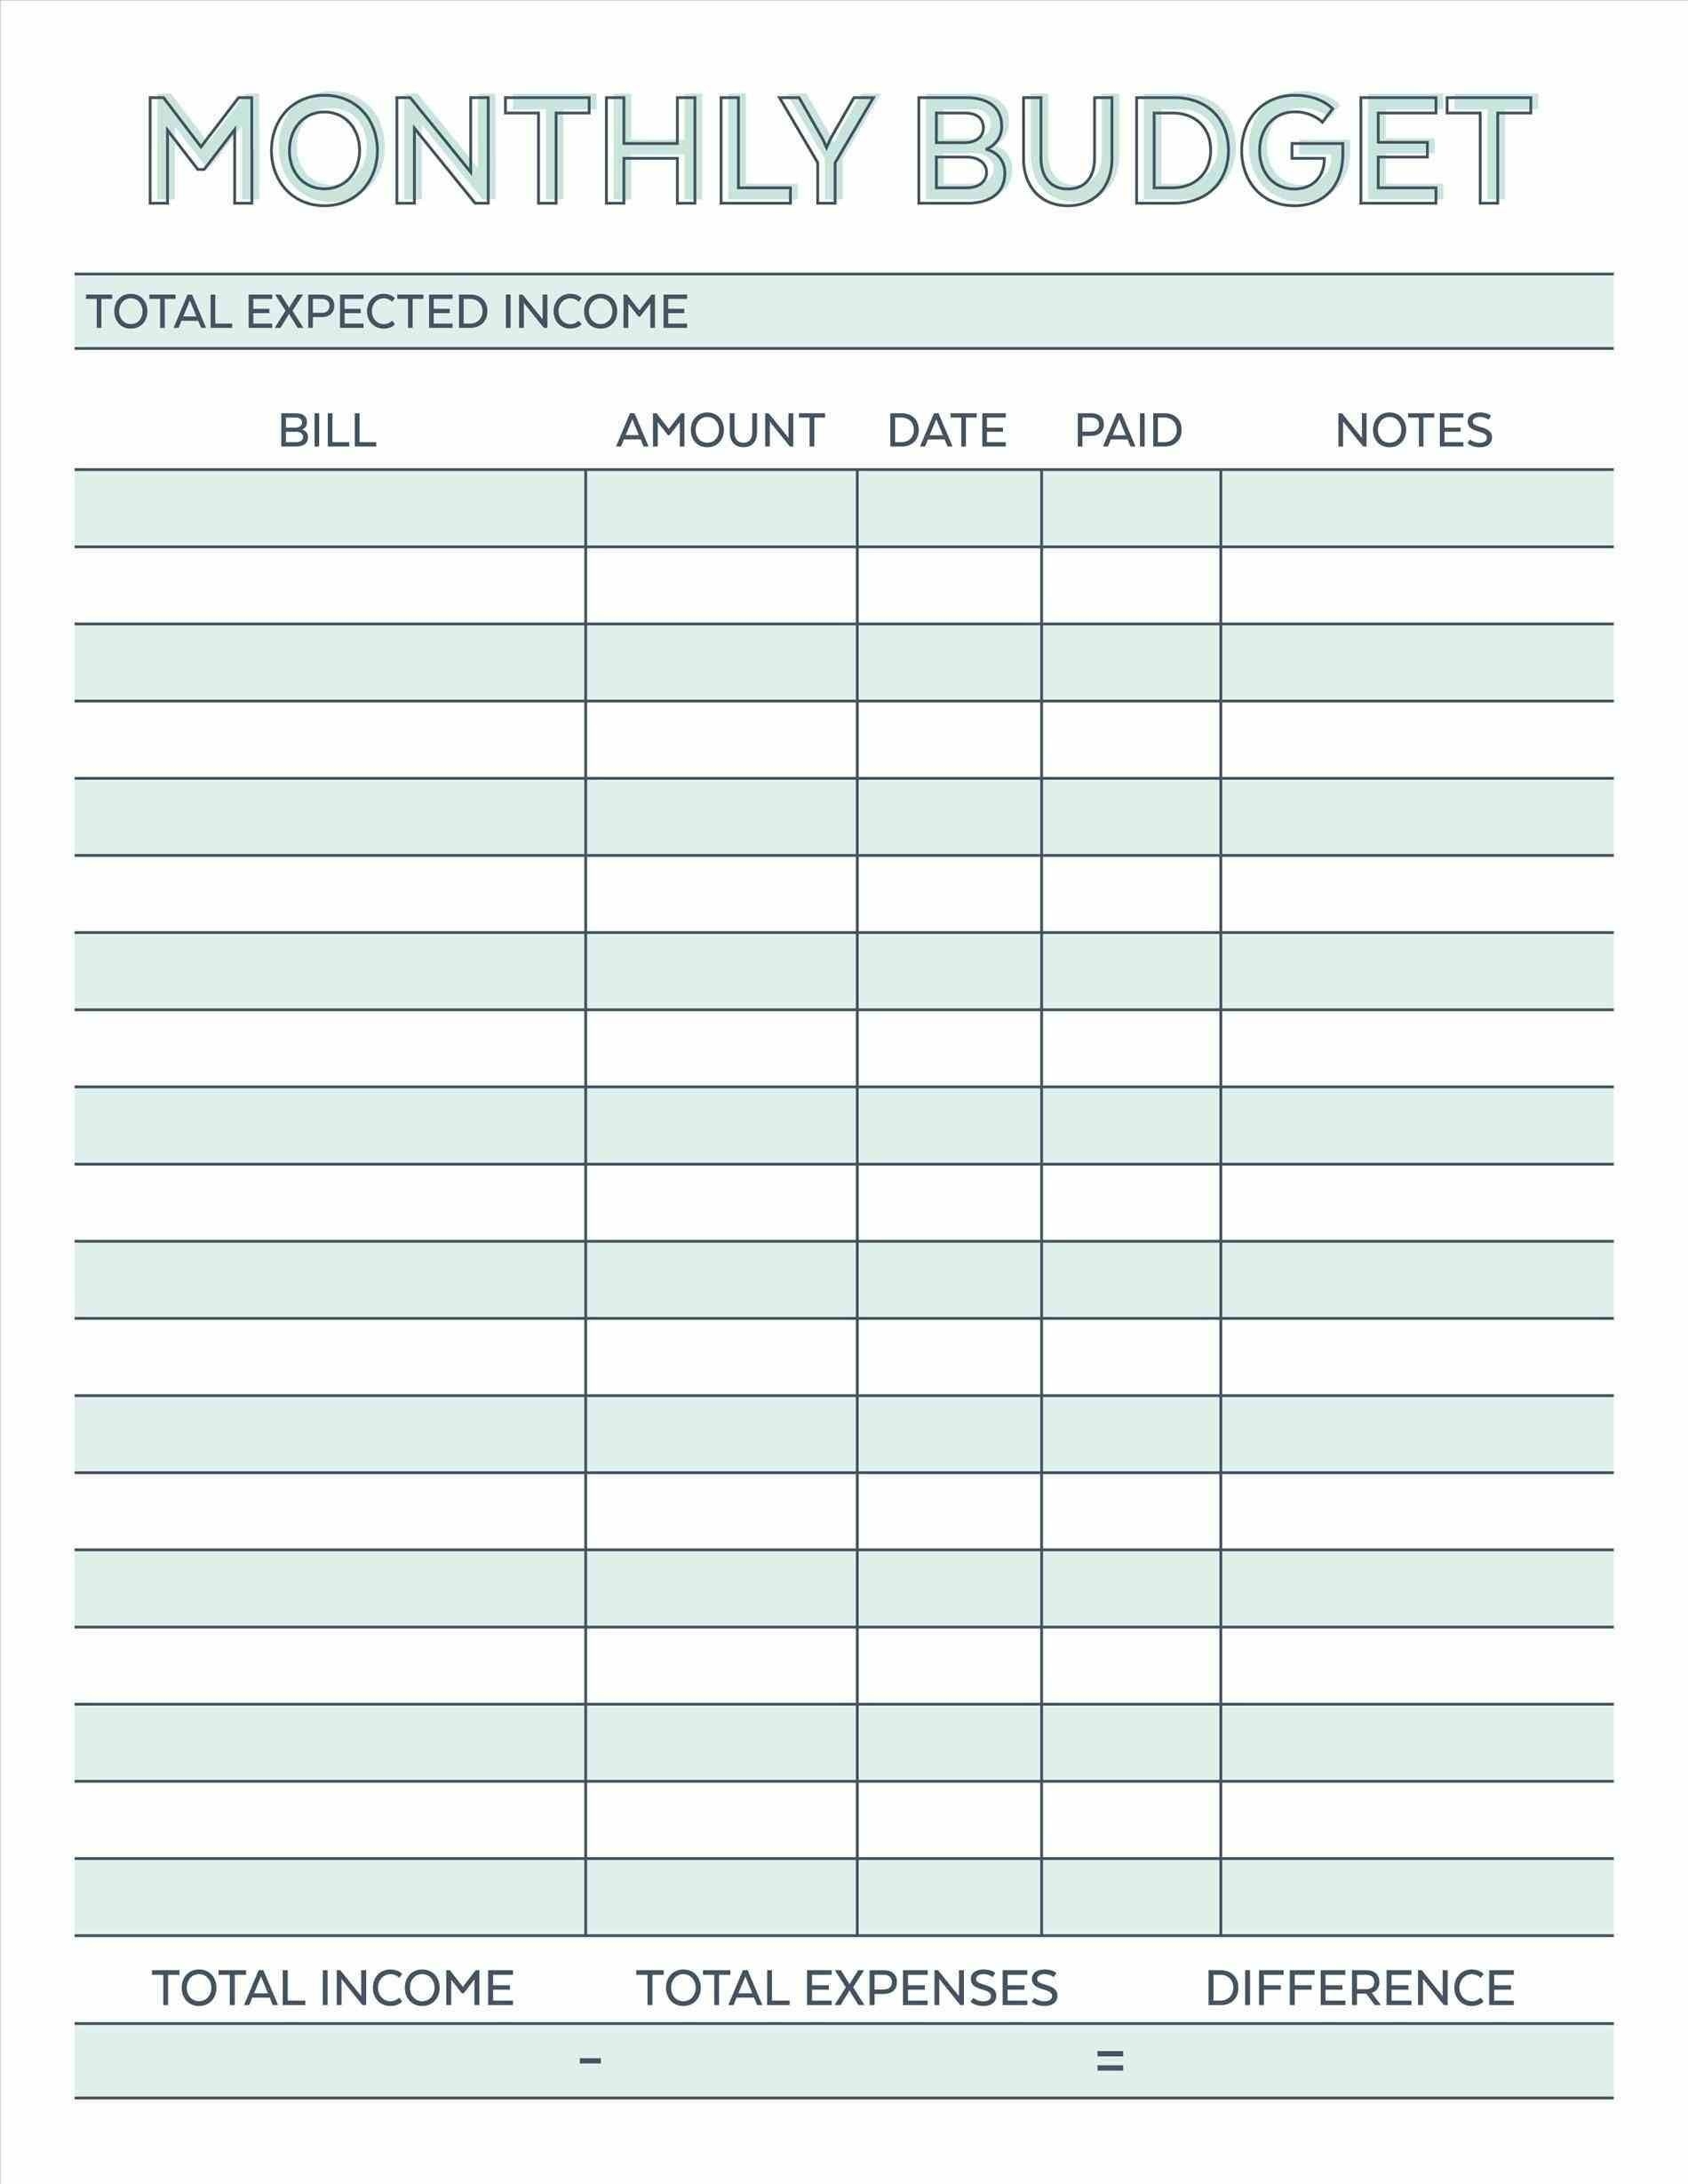 Budget Planner Planner Worksheet Monthly Bills Template Free-Blank Template To List Monthly Billd